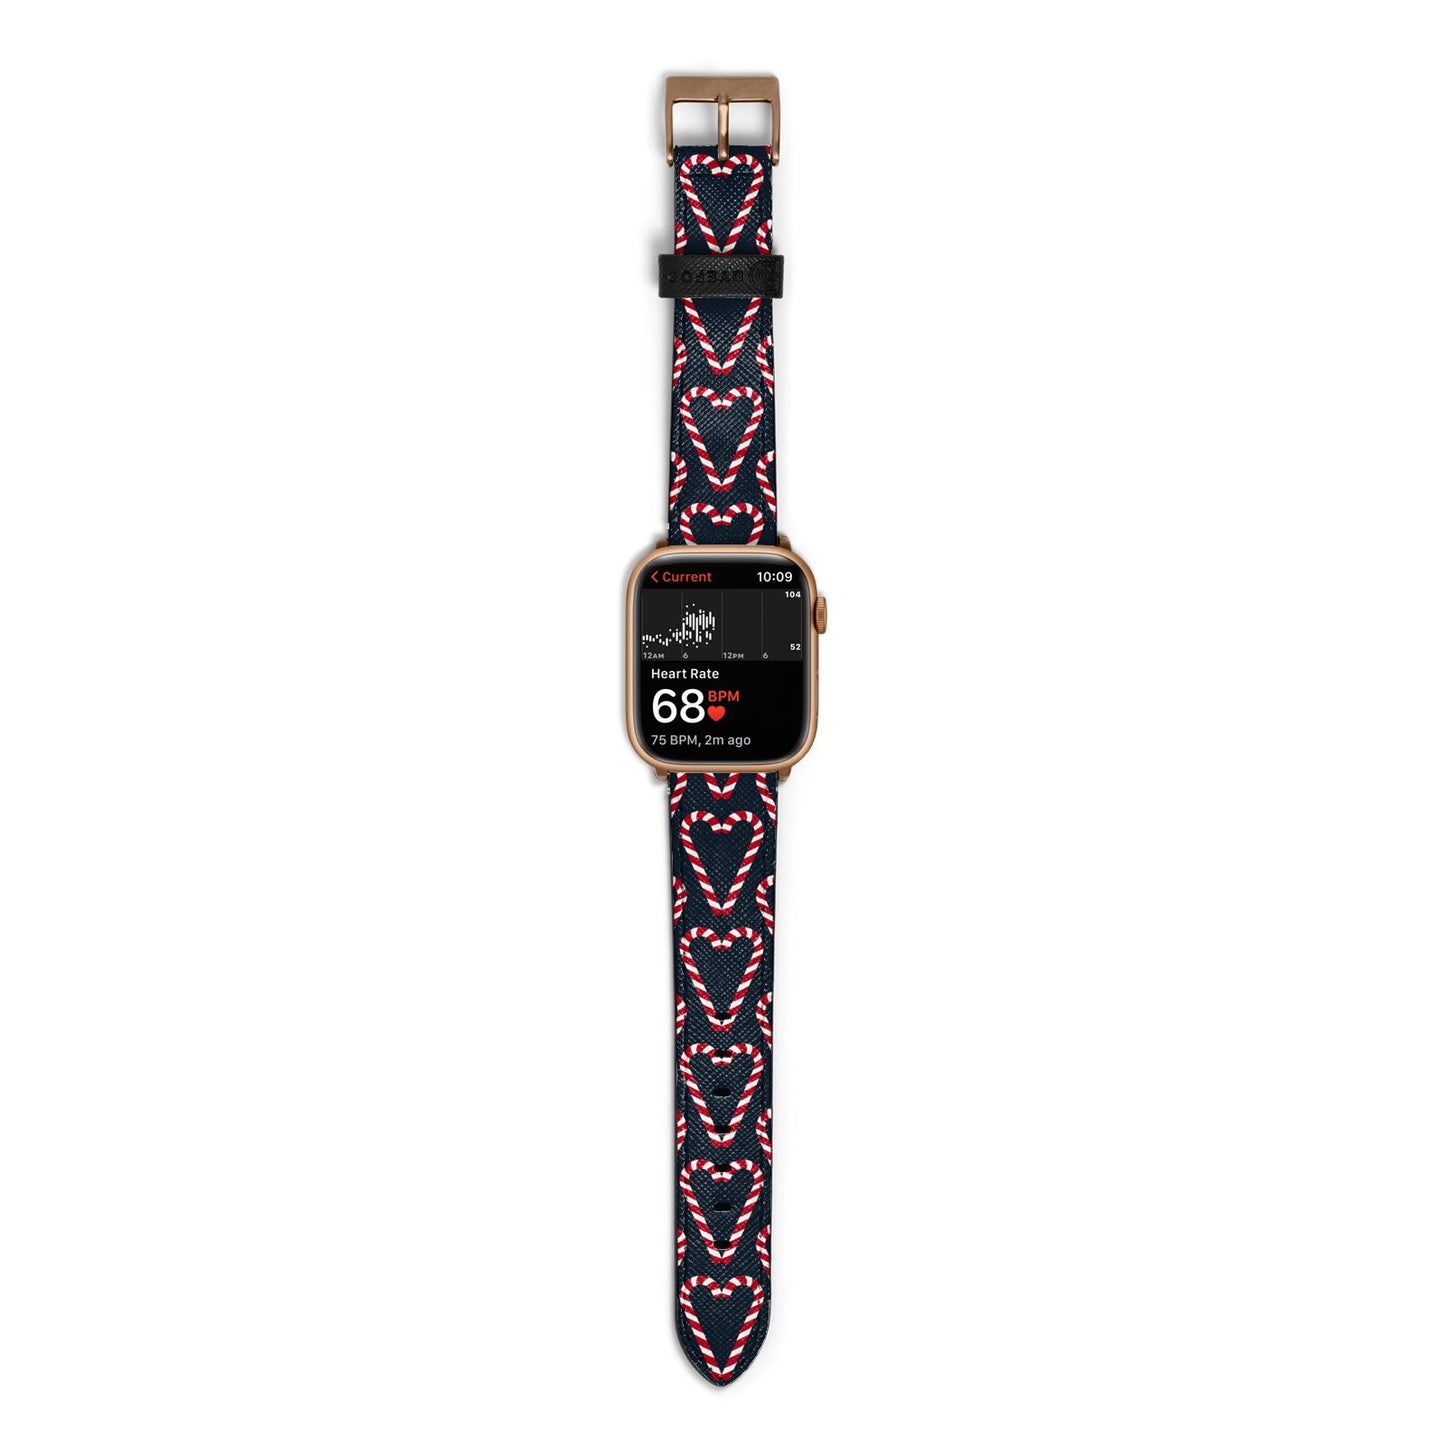 Candy Cane Pattern Apple Watch Strap Size 38mm with Gold Hardware